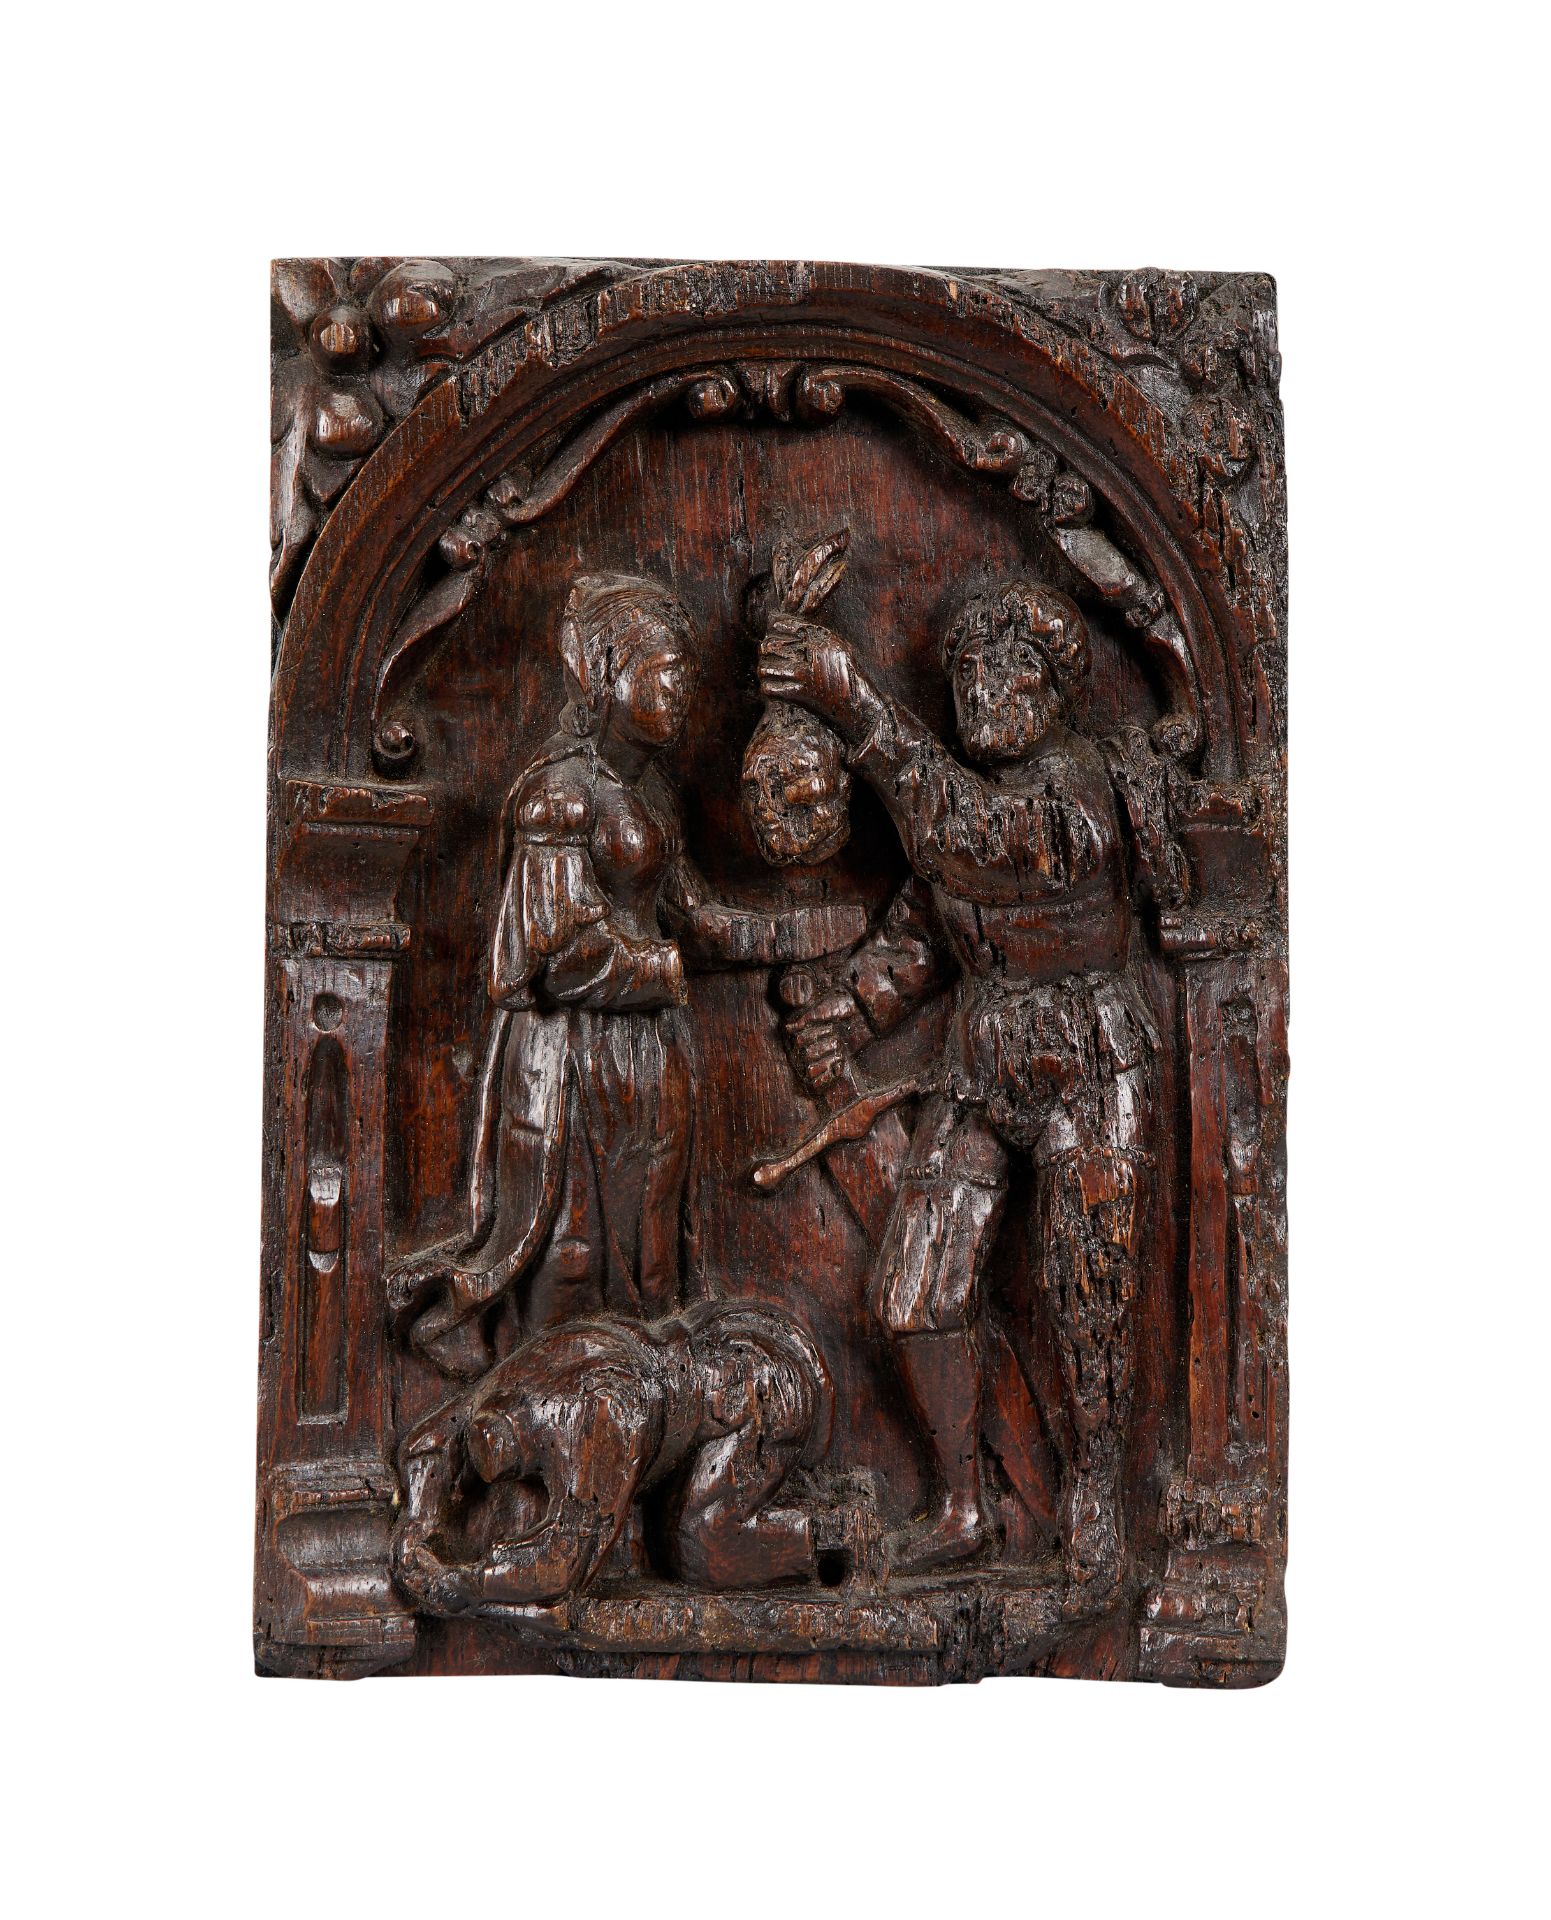 An early 17th century carved oak panel depicting the beheading of John the Baptist